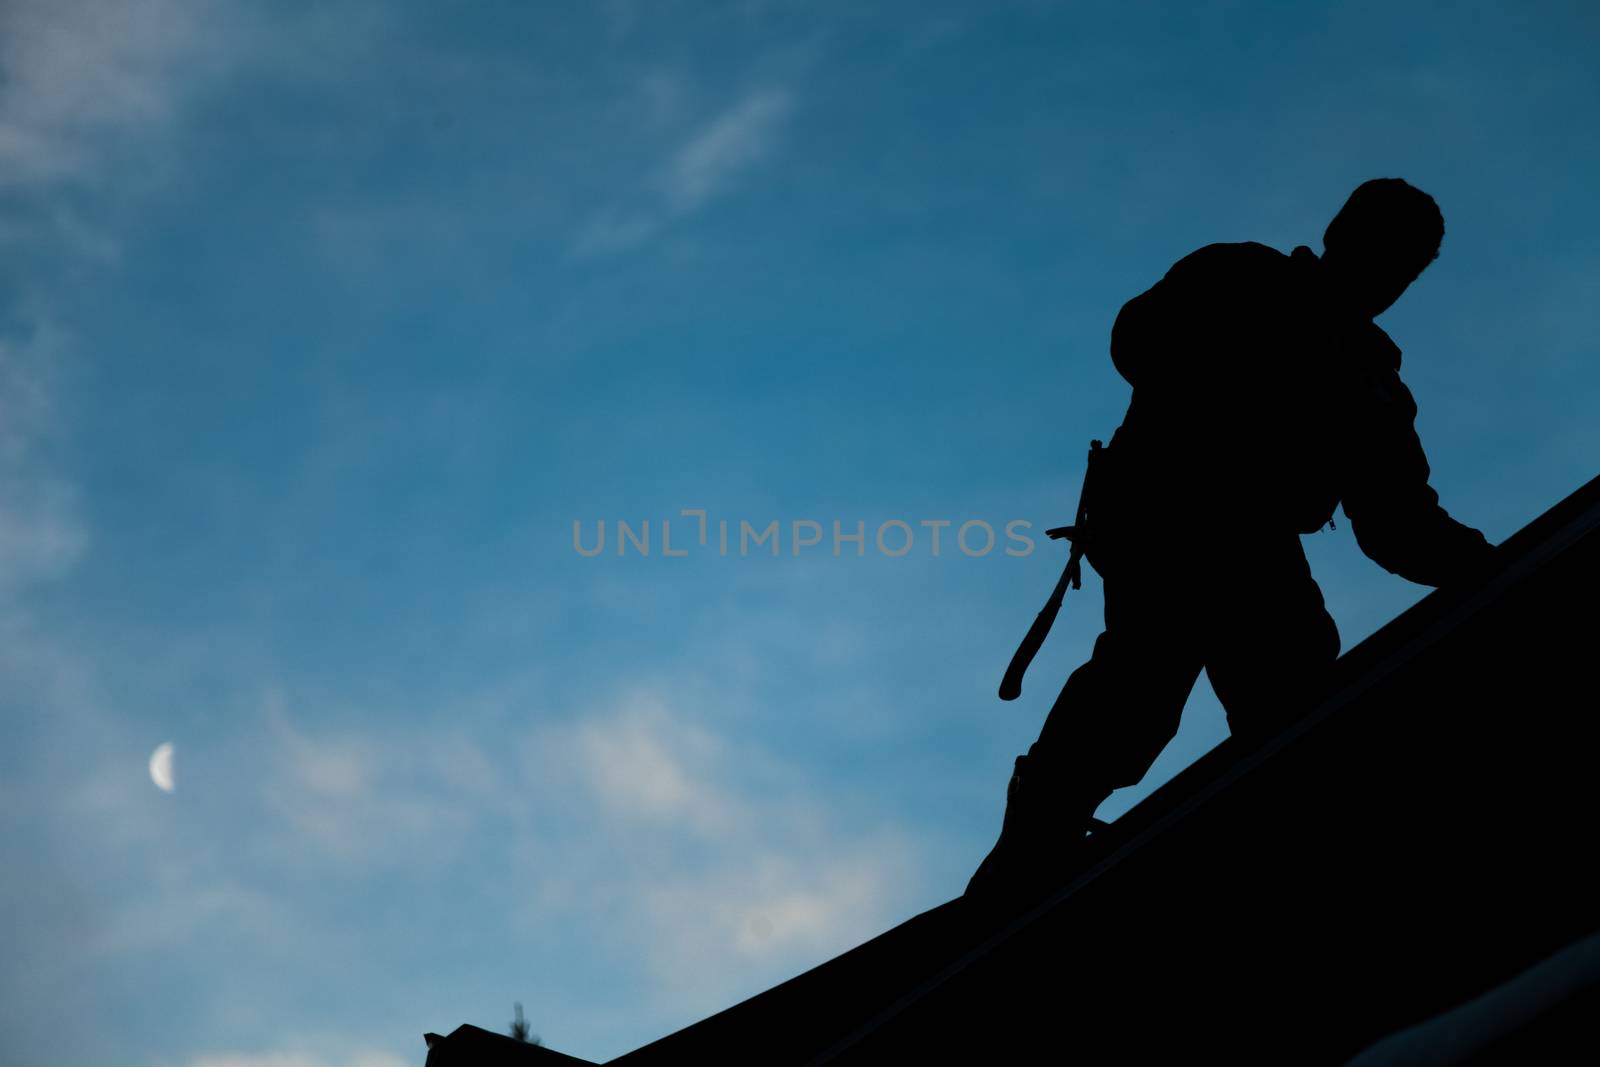 Contractor in Silhouette working on a Roof Top by aetb